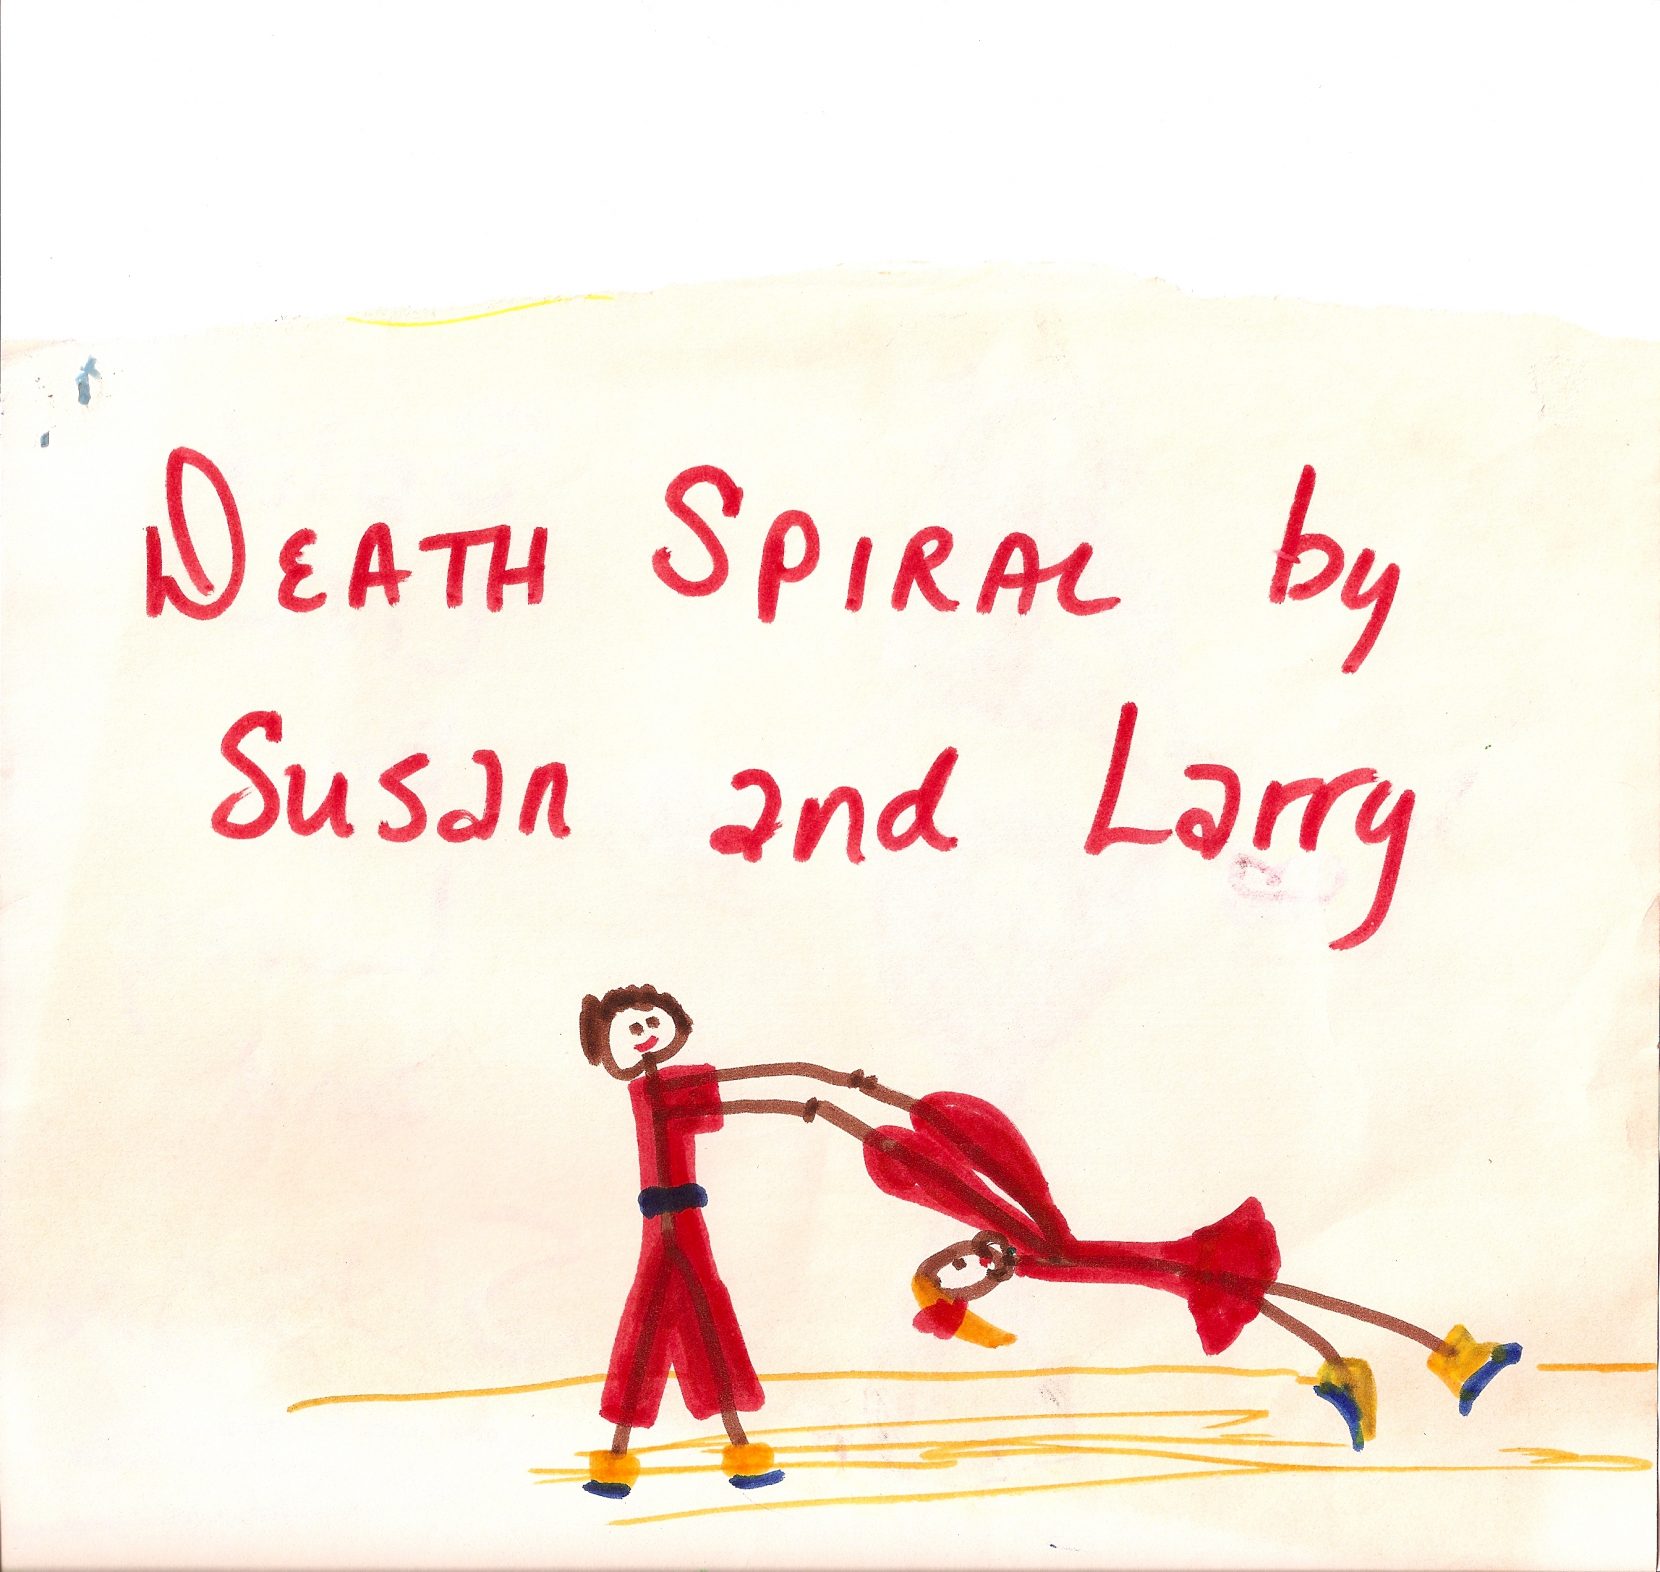 1980s - Death-Spiral-by-Larry-and-Susan.jpg